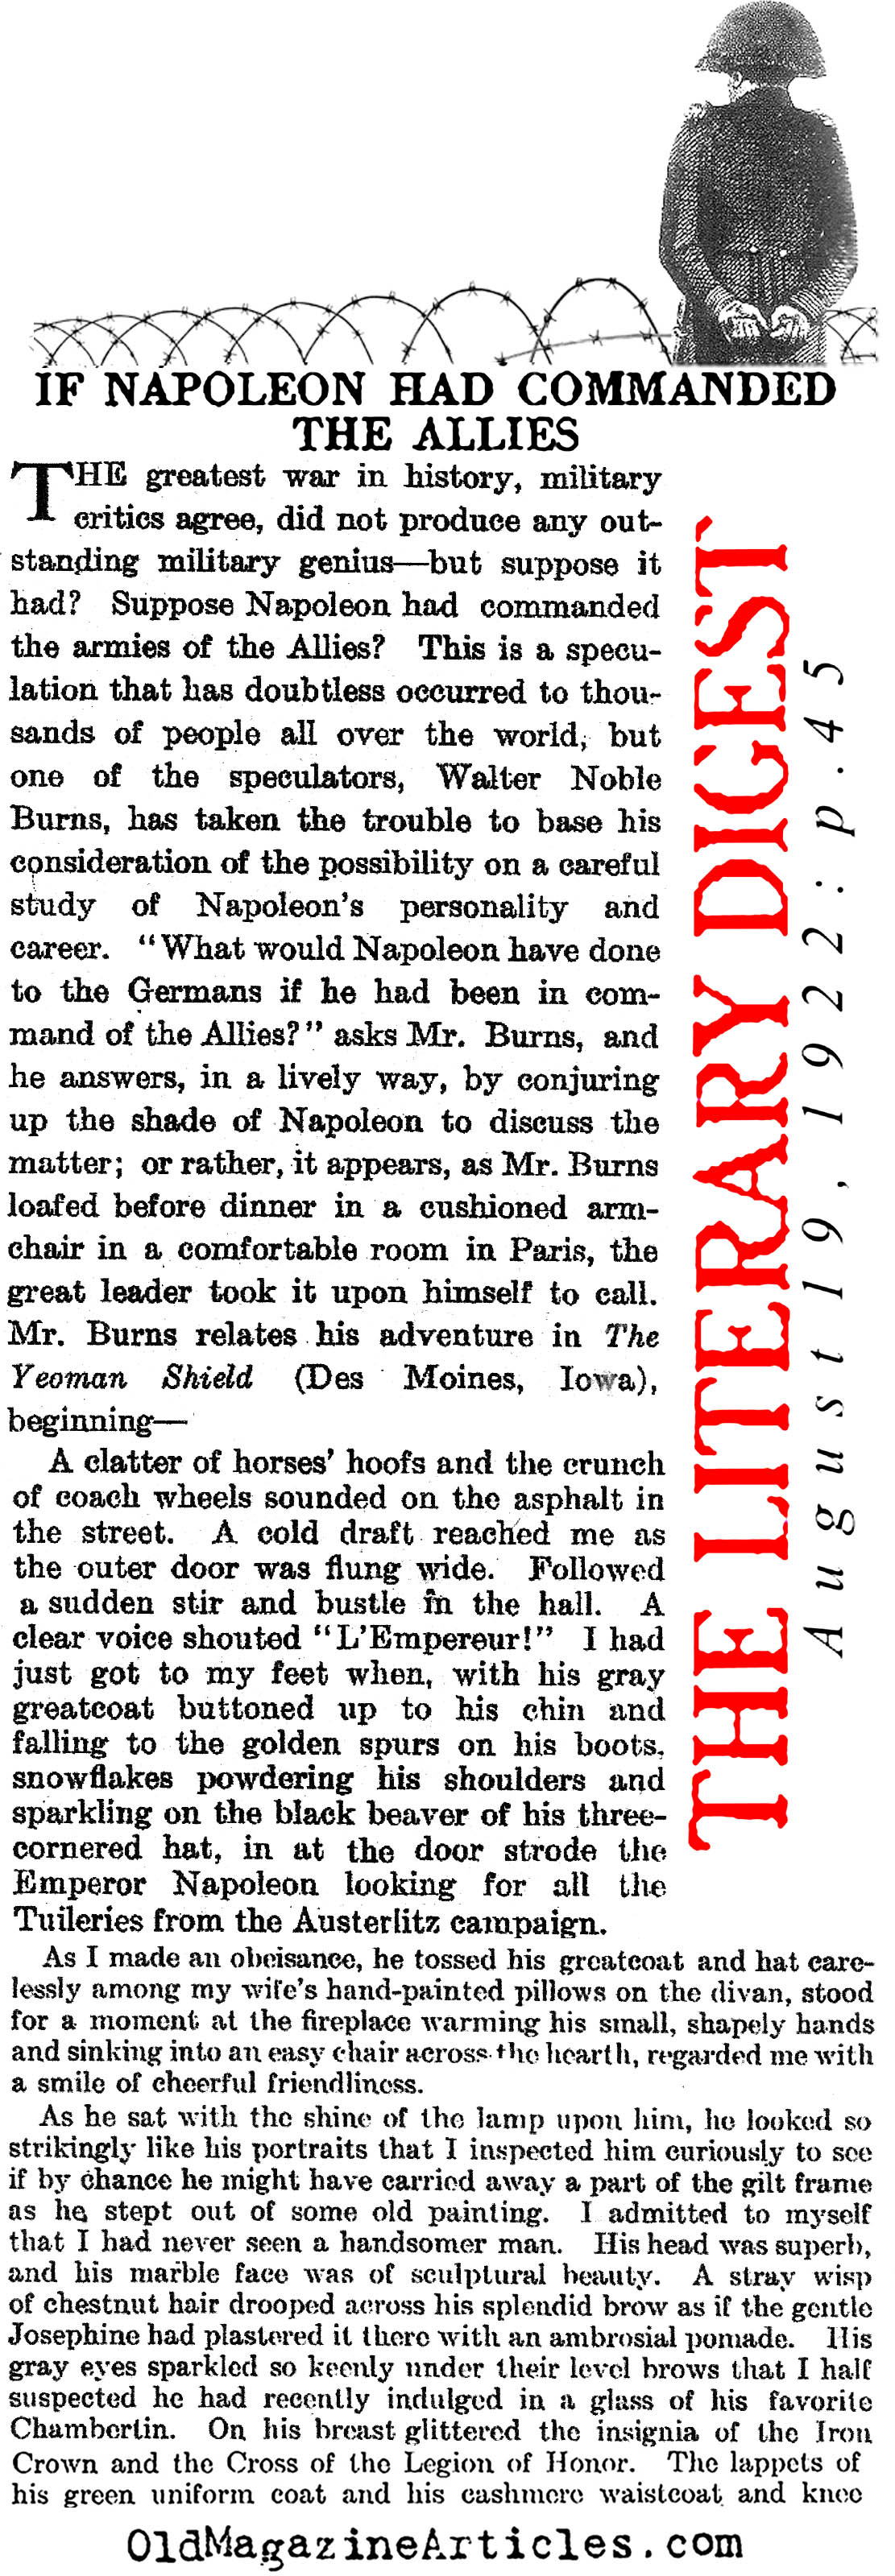 Napoleon Takes Charge (Literary Digest, 1922)